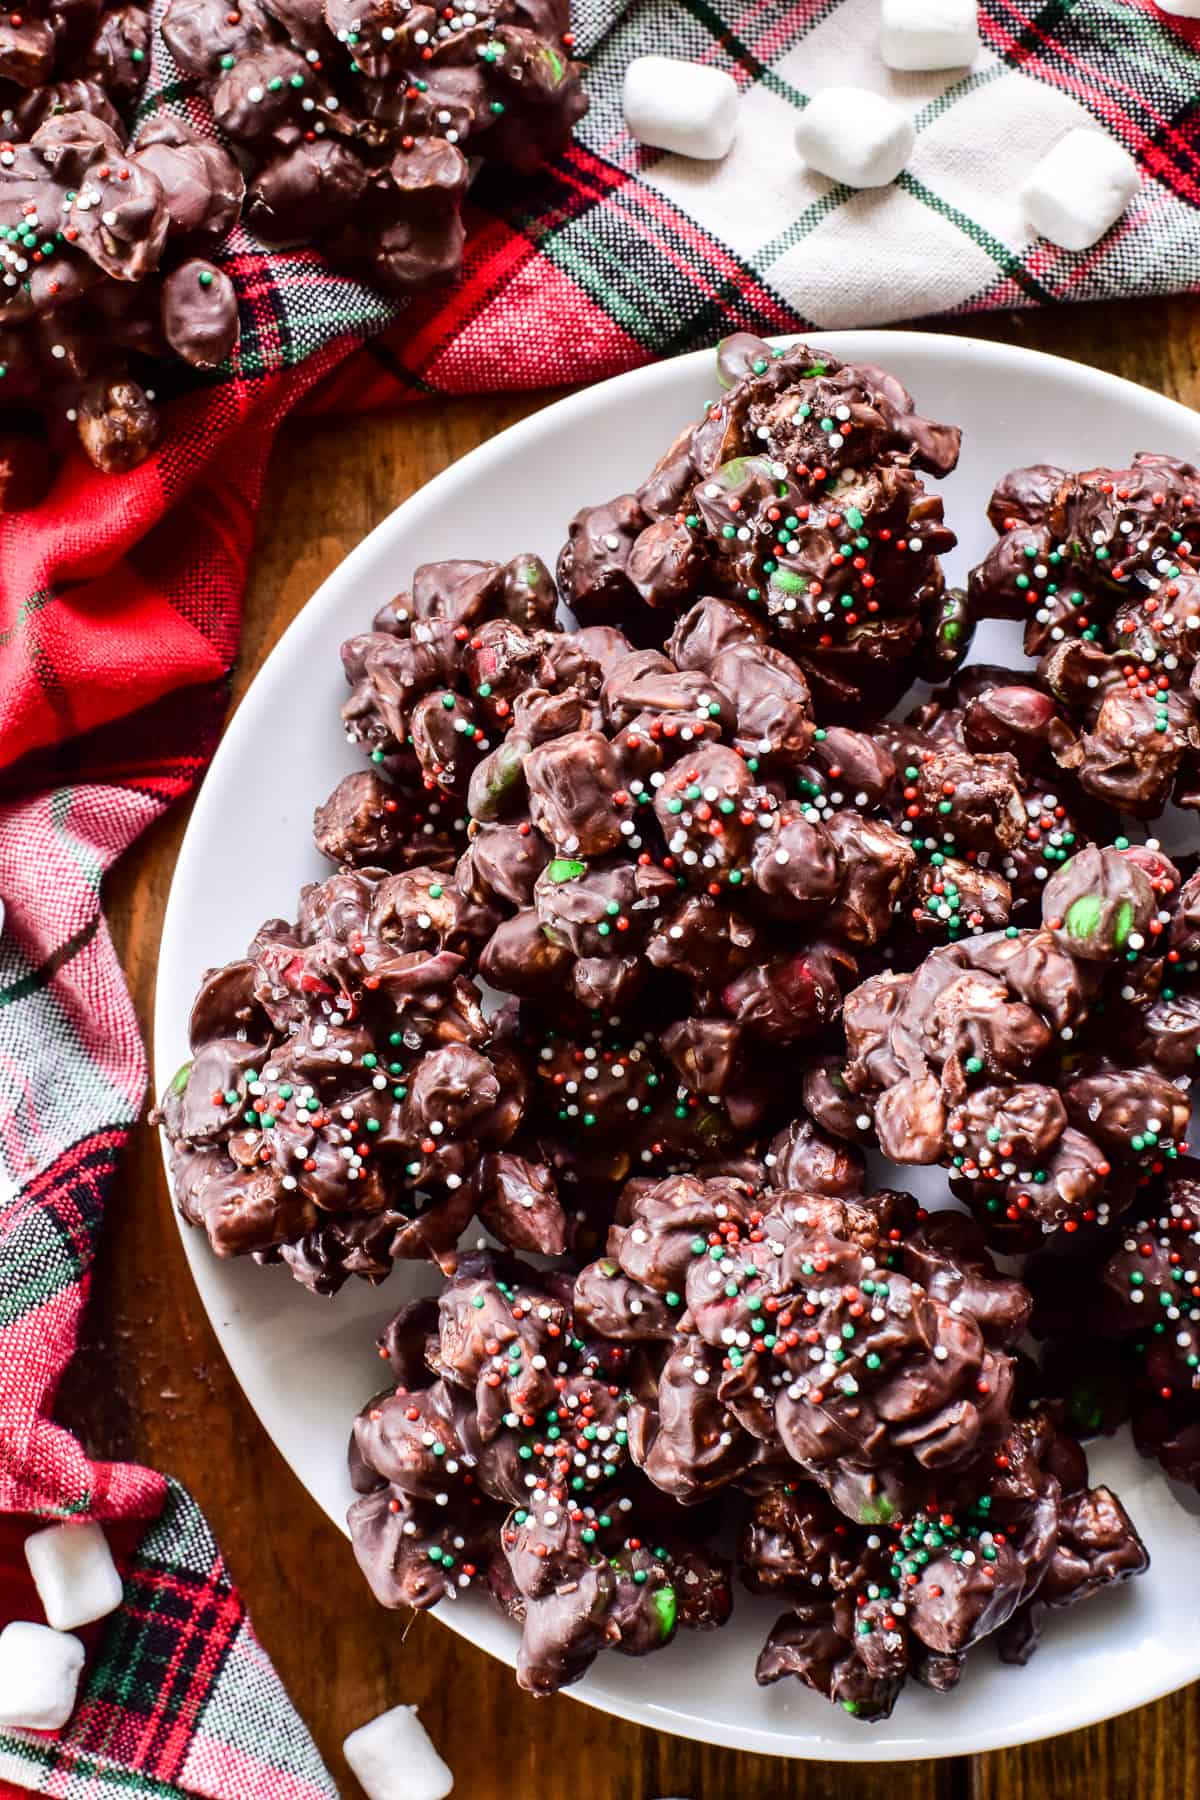 Rocky Road candy decorated with red & green sprinkles with a festive holiday napkin